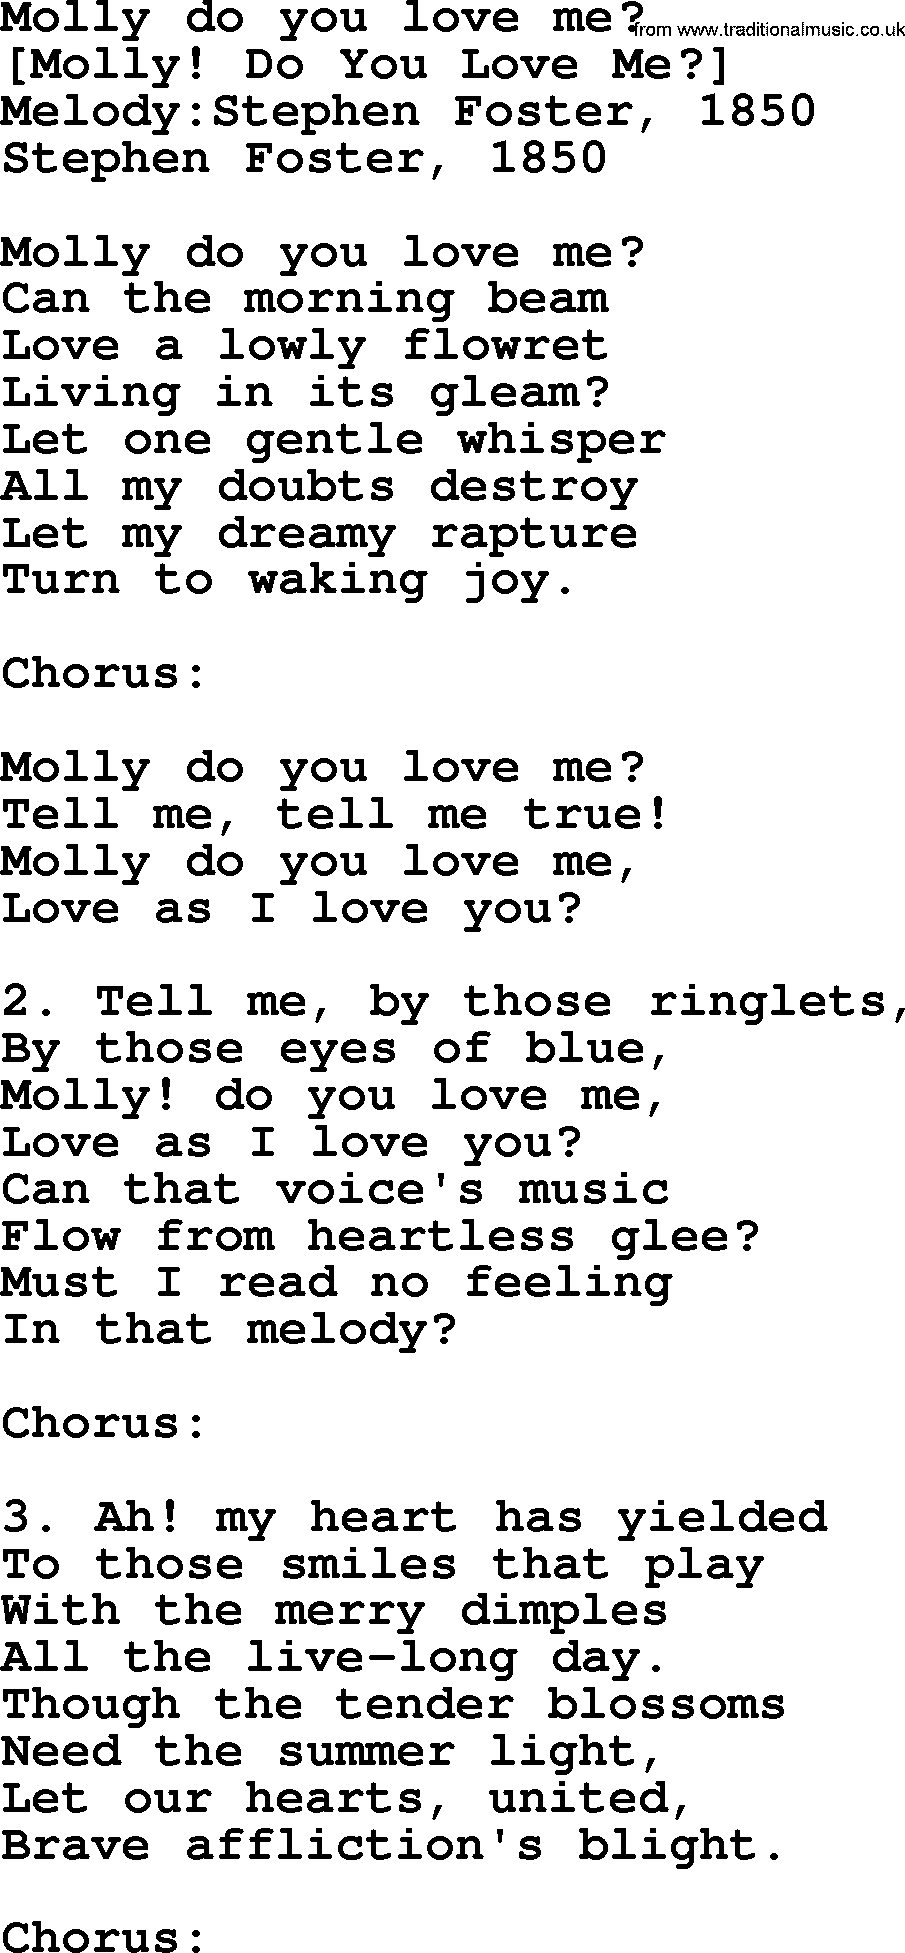 Old American Song: Molly Do You Love Me, lyrics